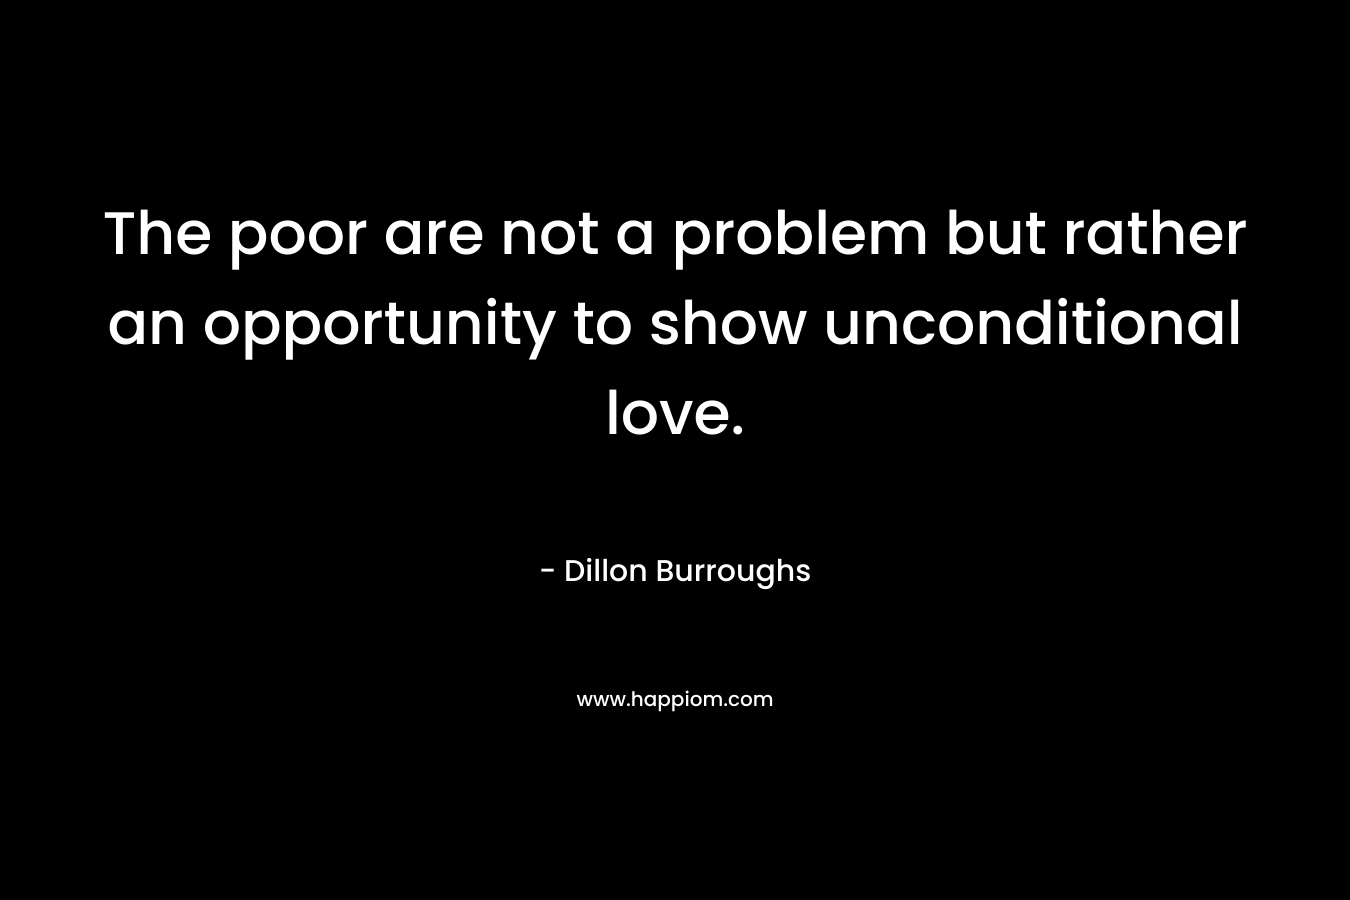 The poor are not a problem but rather an opportunity to show unconditional love.